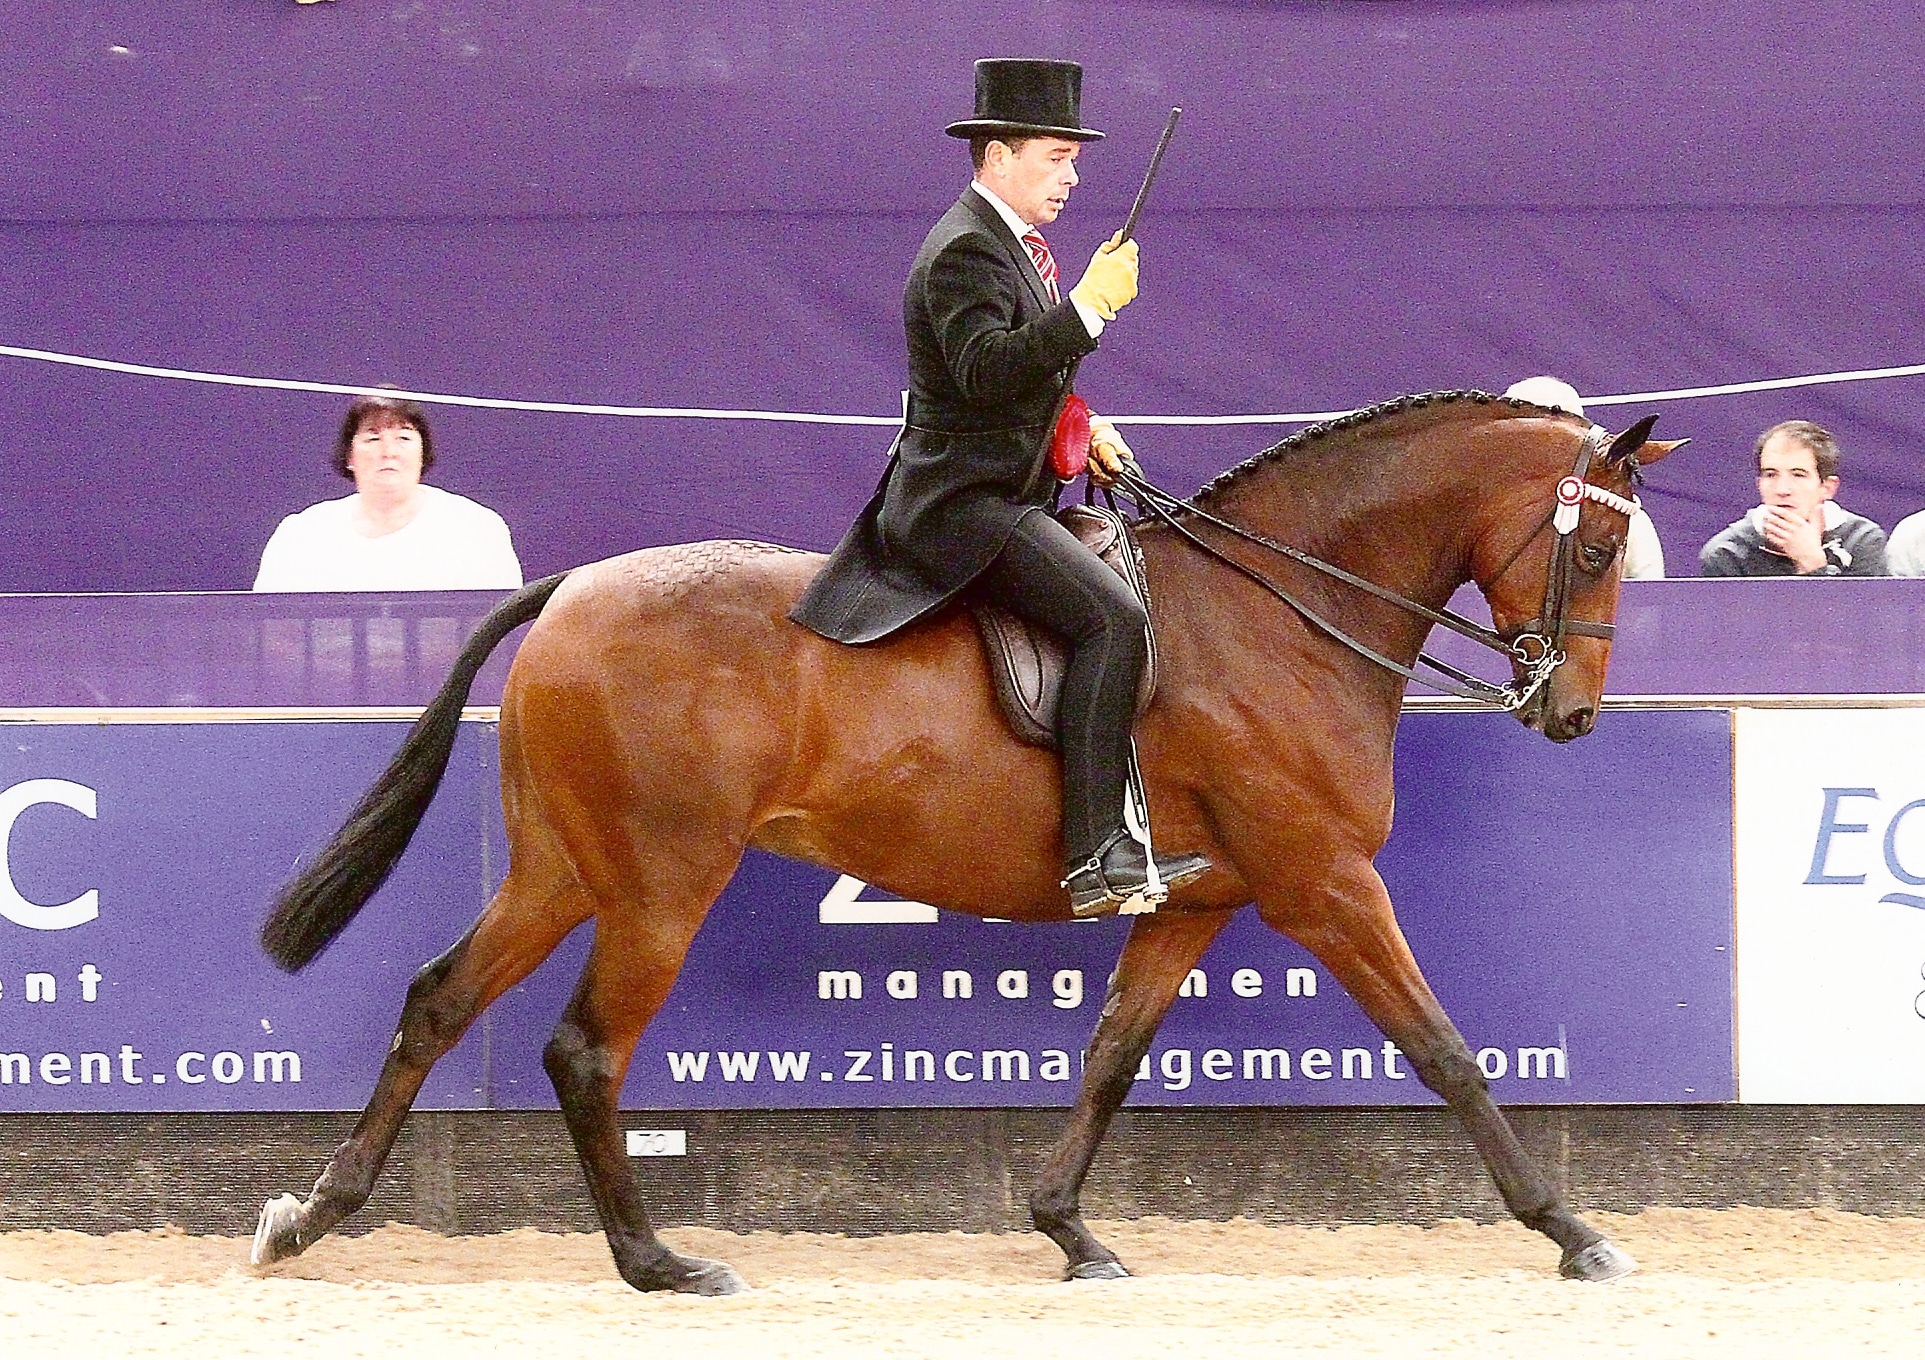 Small Hack of the Year Royal Engagement ridden by Robert Walker and owned by Mrs Lucy Smith Crallan1